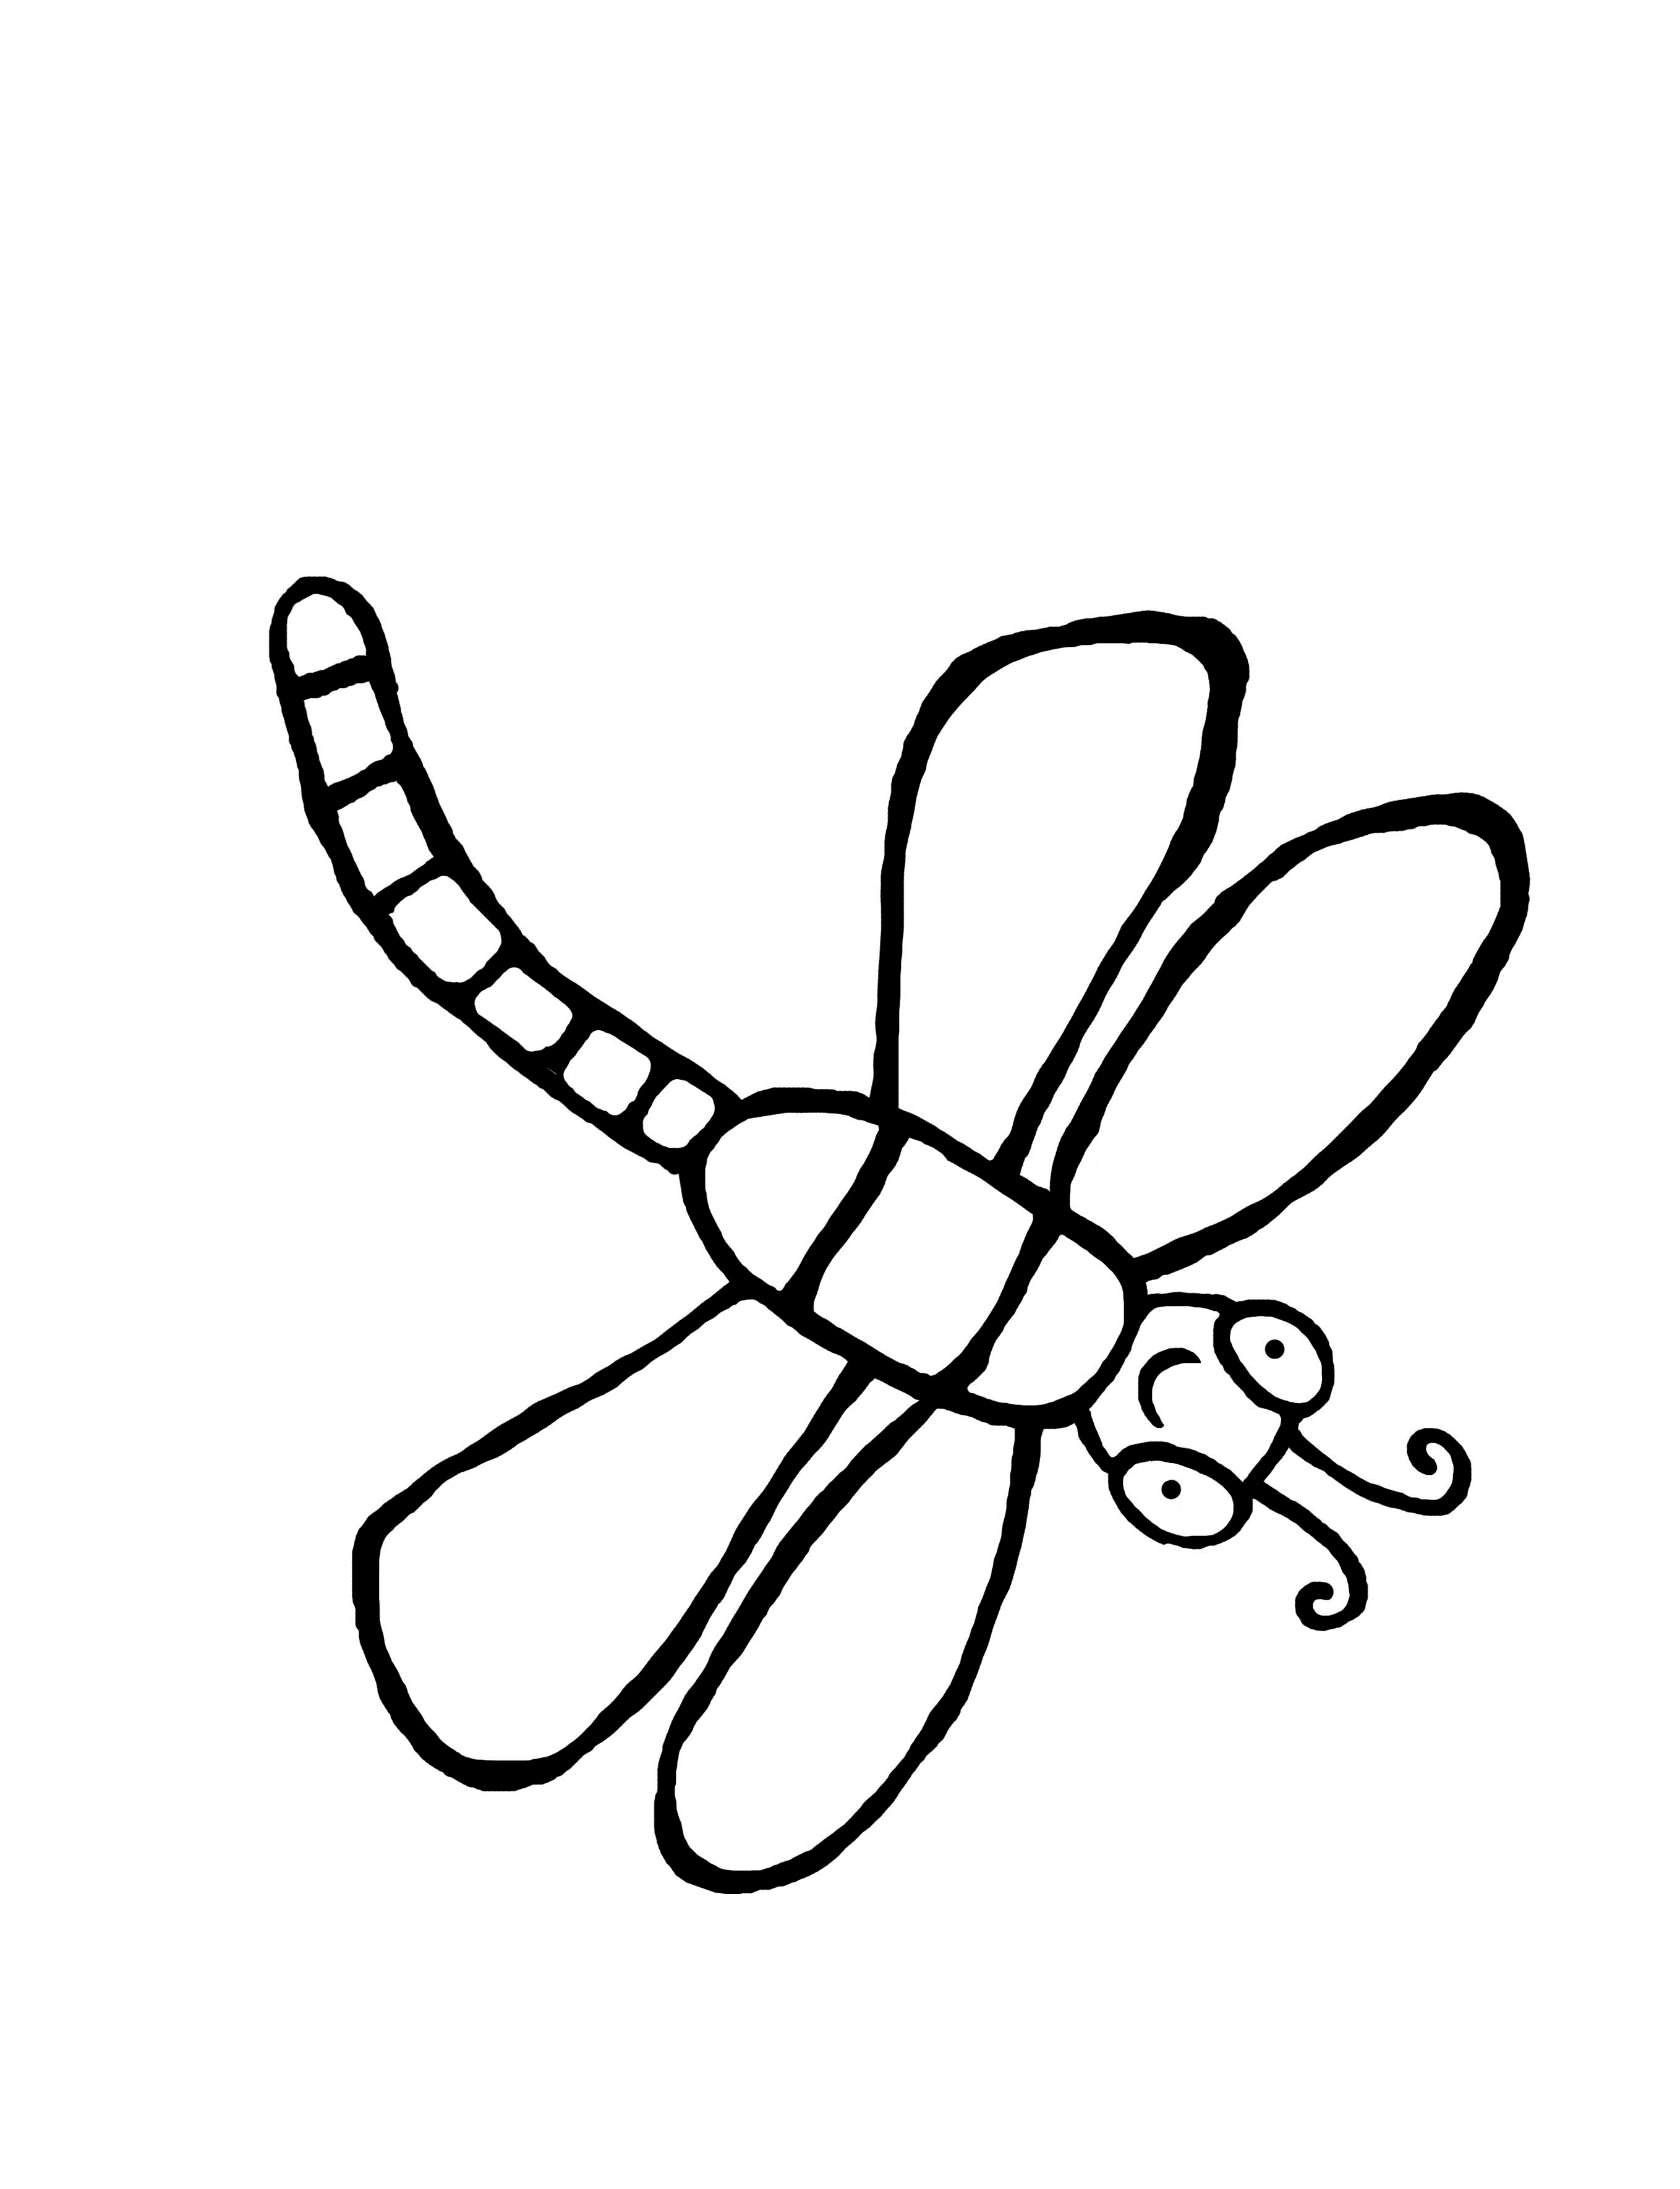 Cartoon Dragonfly Pictures - Cliparts.co